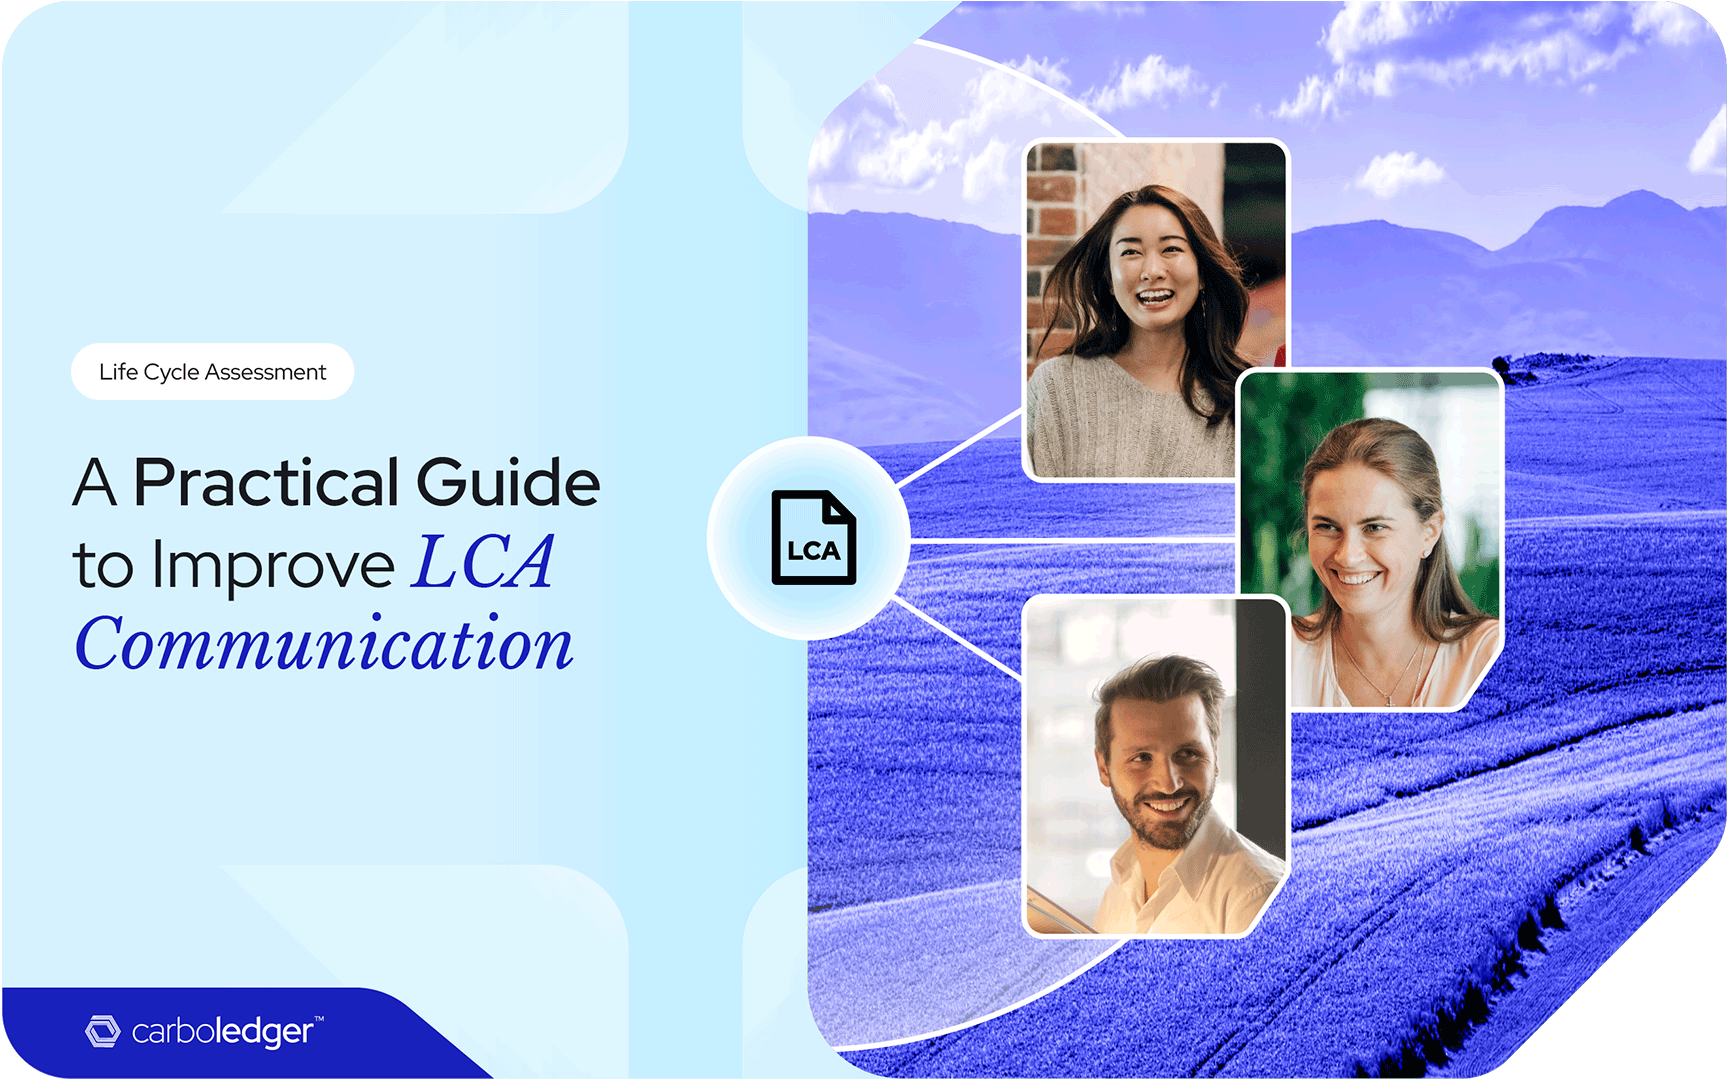 A Practical Guide to Improve LCA Communications